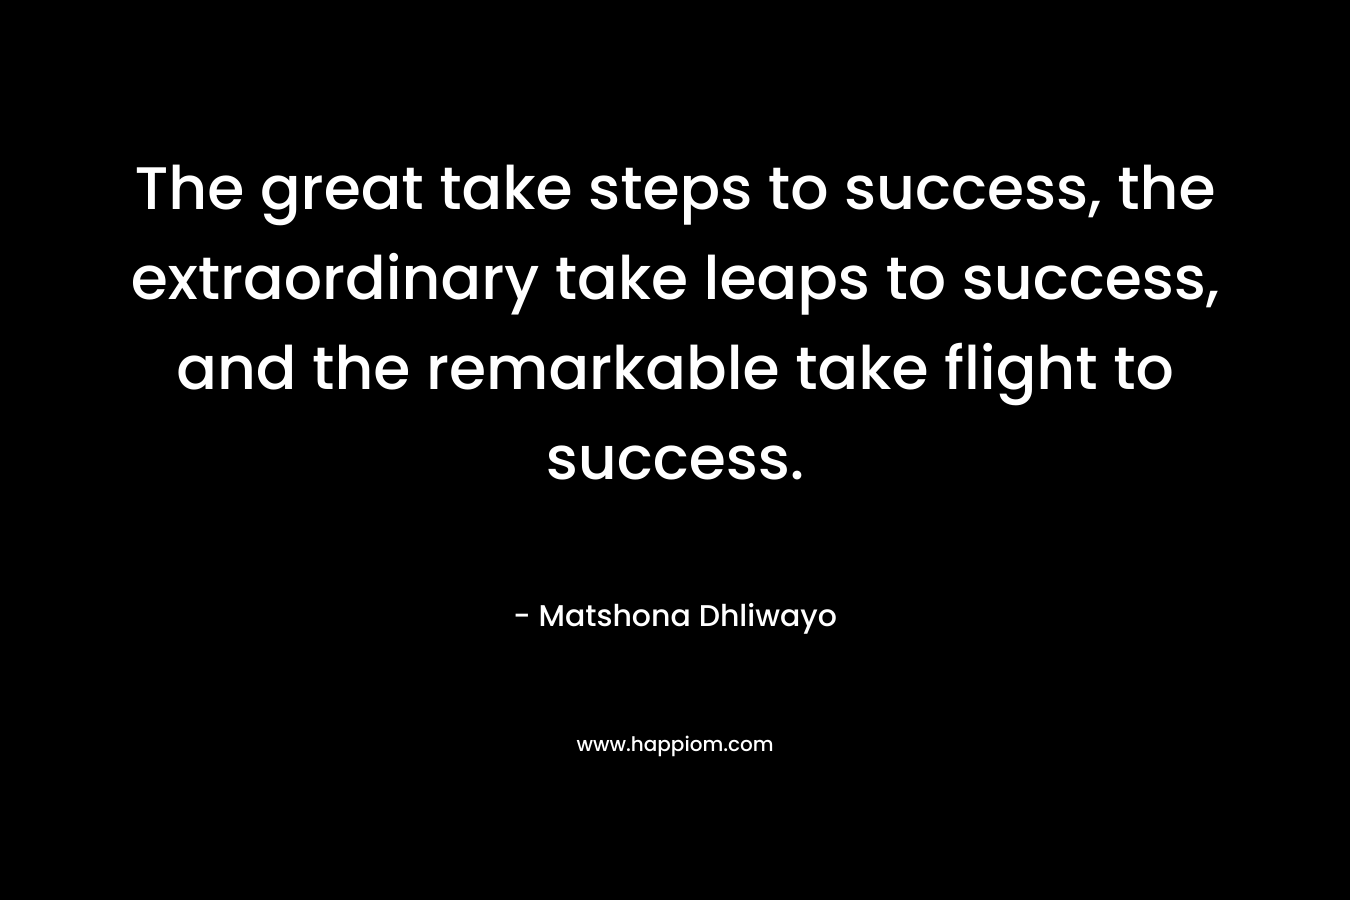 The great take steps to success, the extraordinary take leaps to success, and the remarkable take flight to success.